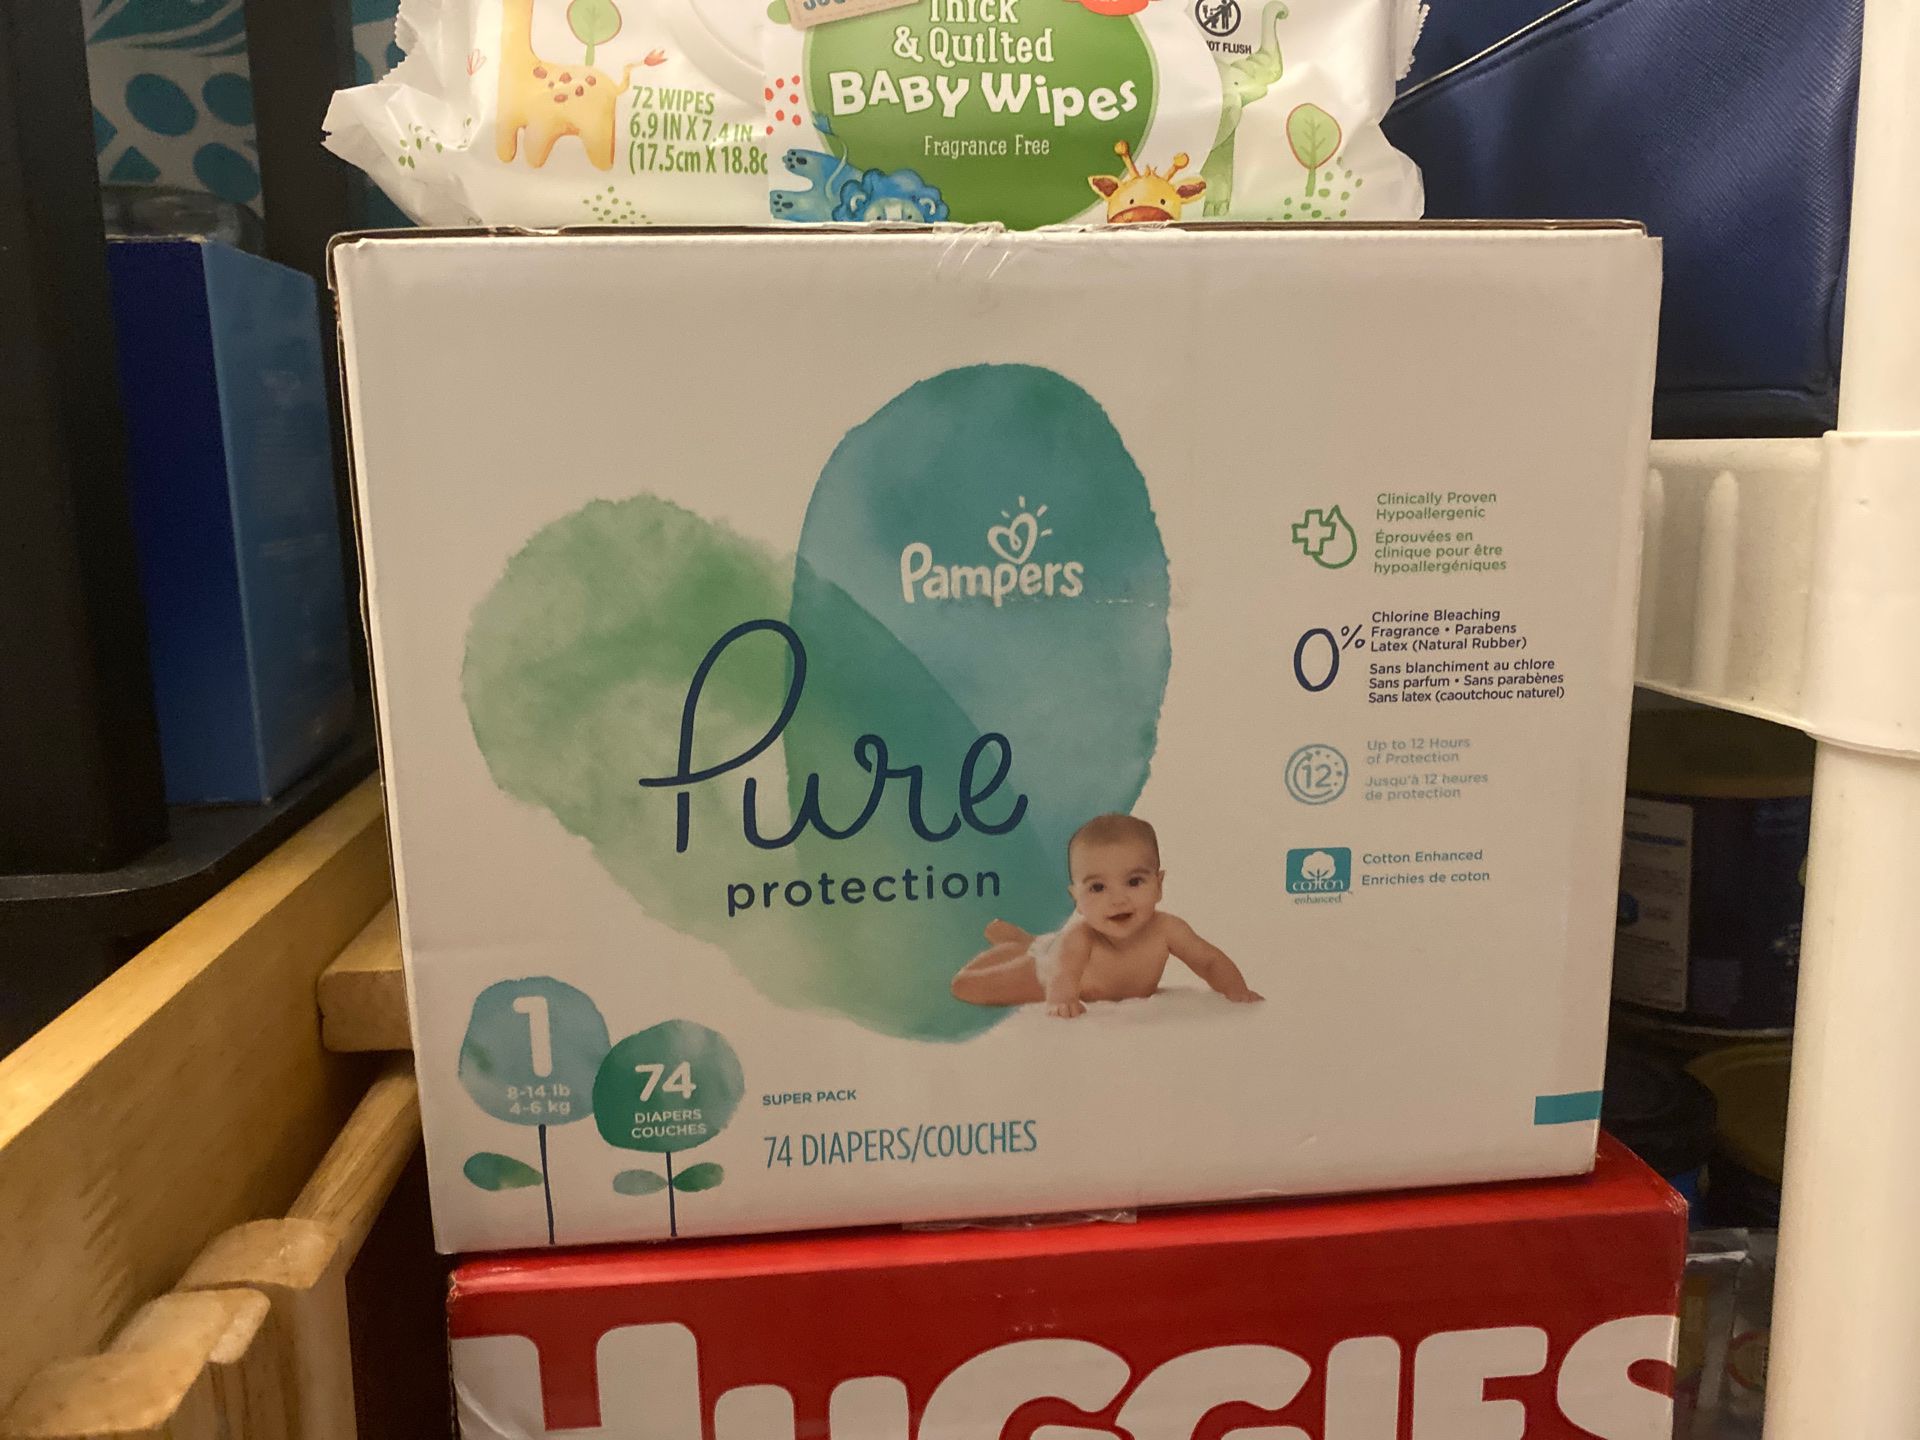 Diapers/Wipes